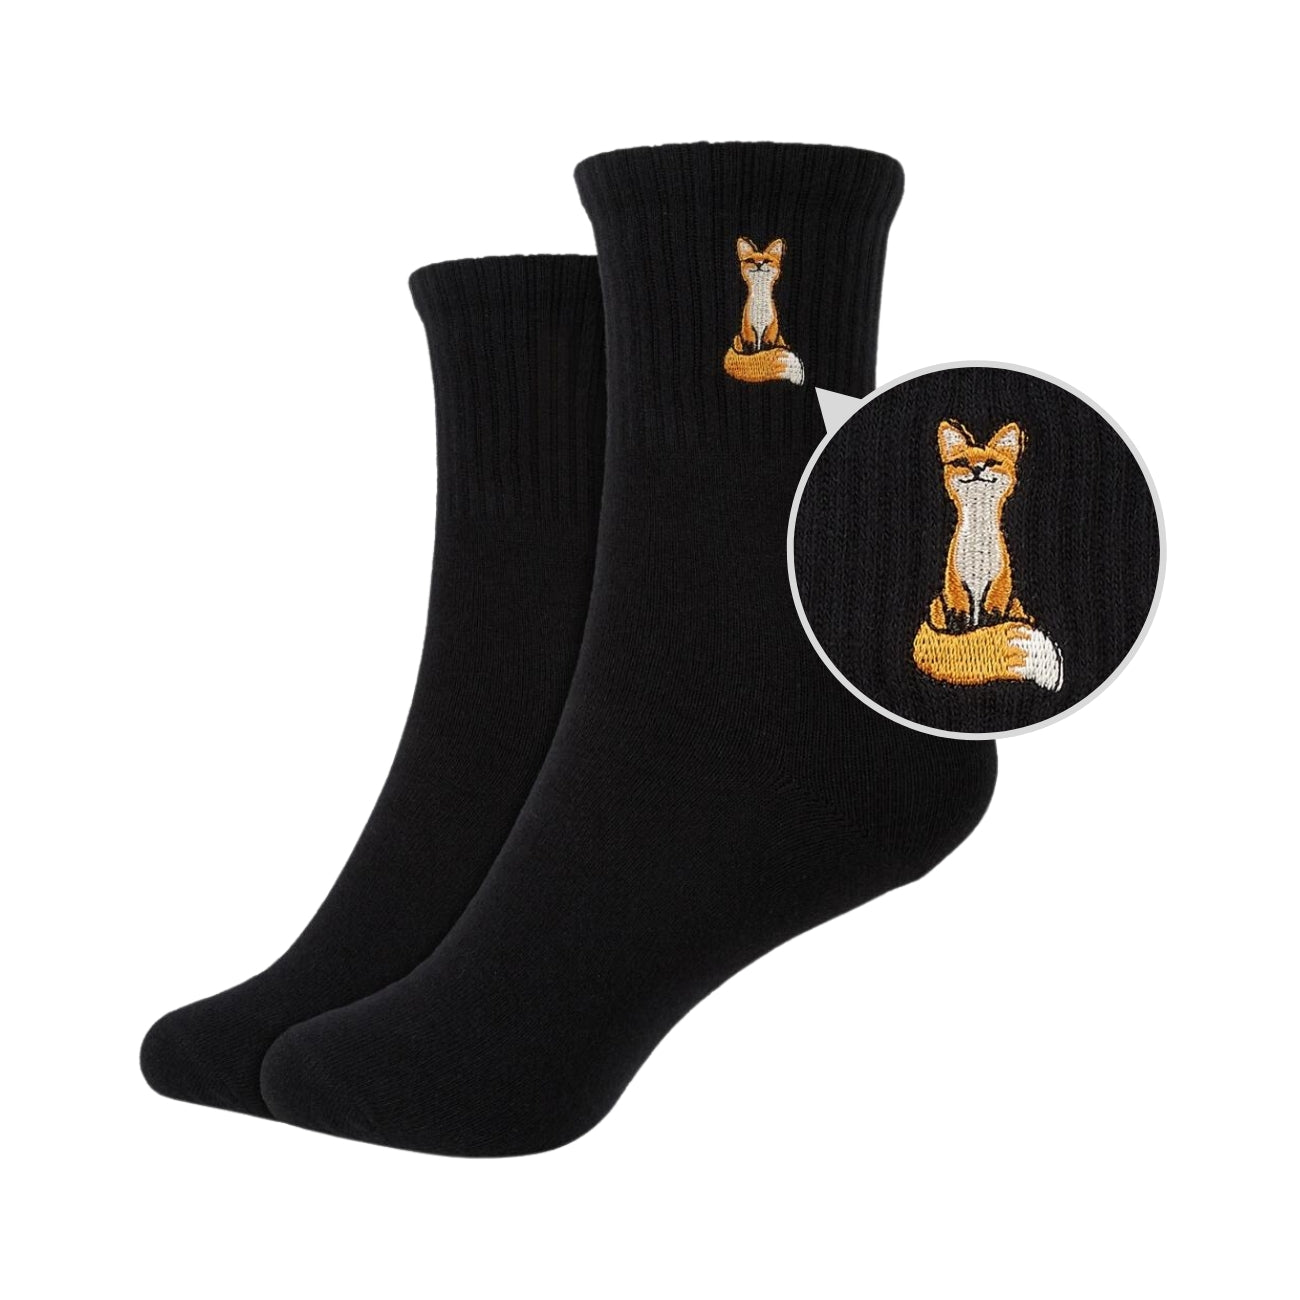 Women's Solid Crew Length Socks with Fox Embroidery - IDENTITY Apparel Shop